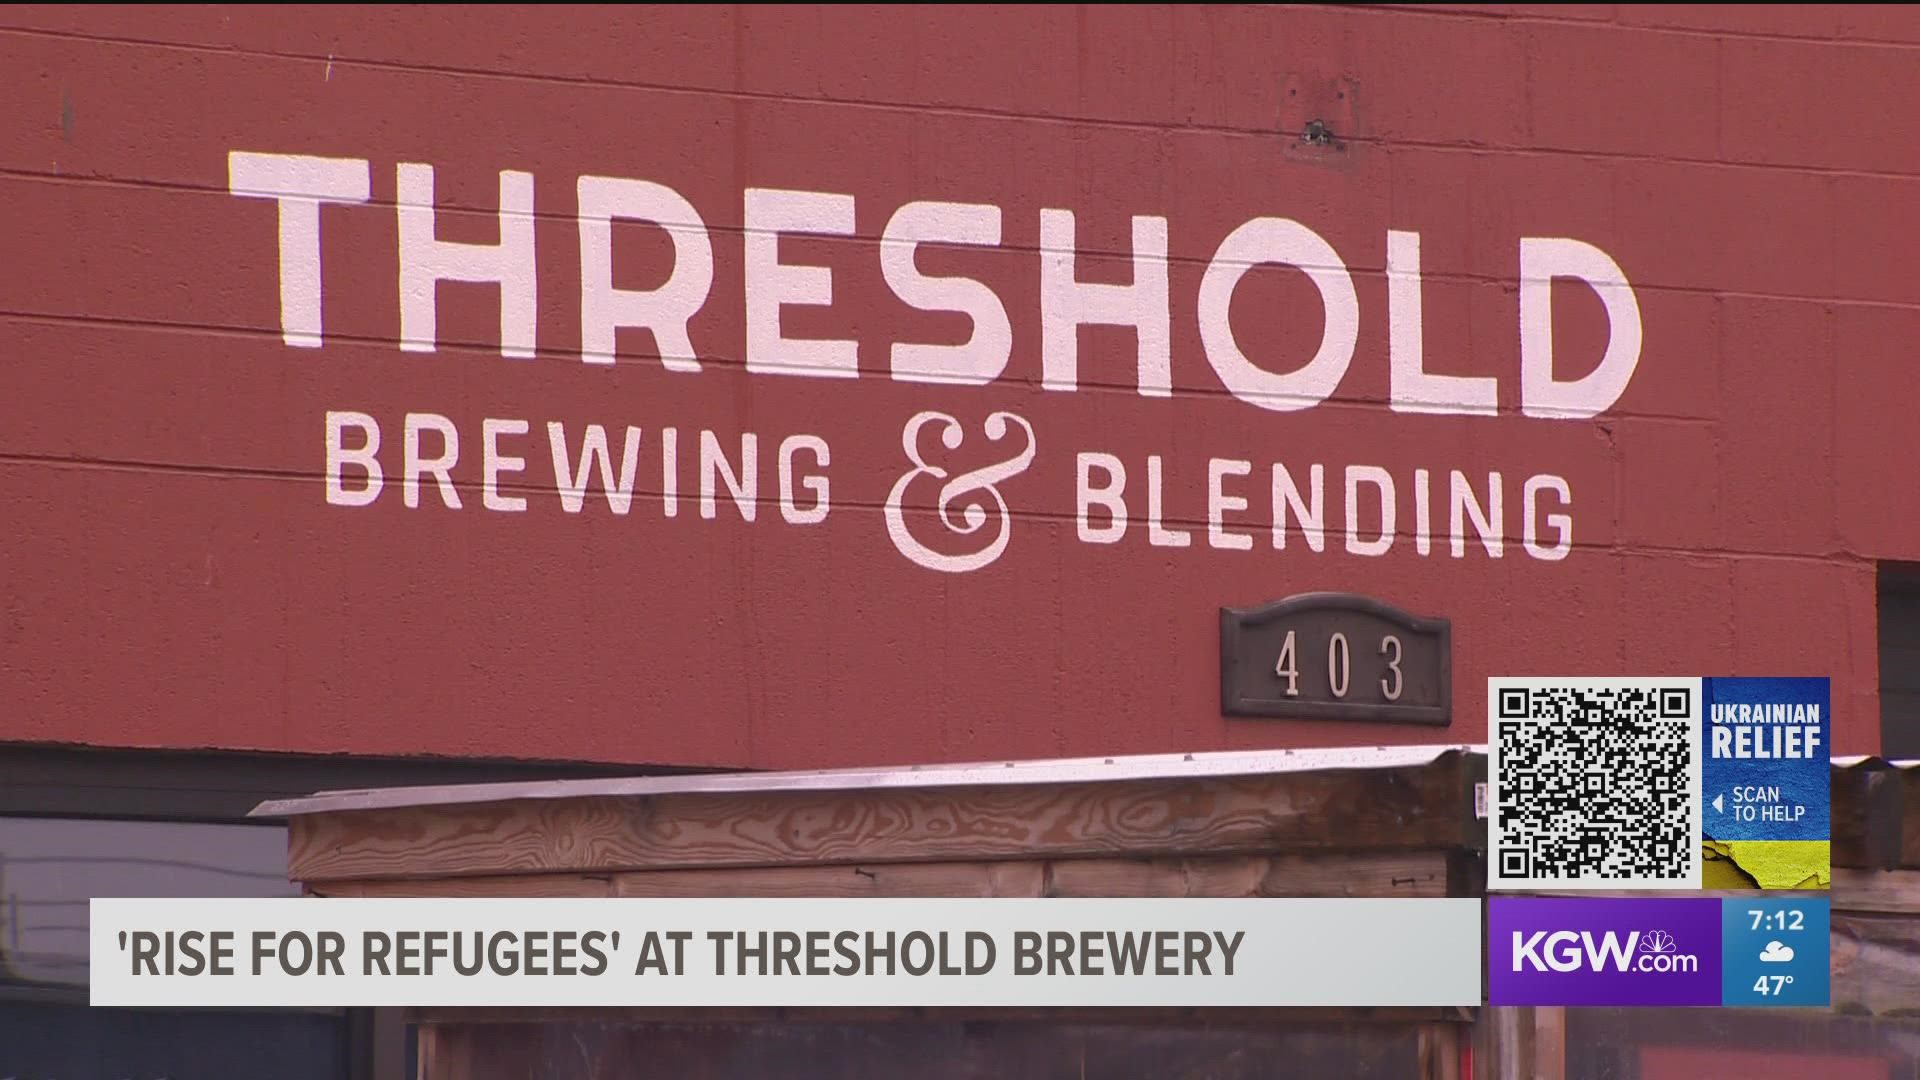 Beermaker Jarek Szymanski is preparing Threshold Brewery and Taproom for a fundraising event to support Ukrainian refugees in Poland.